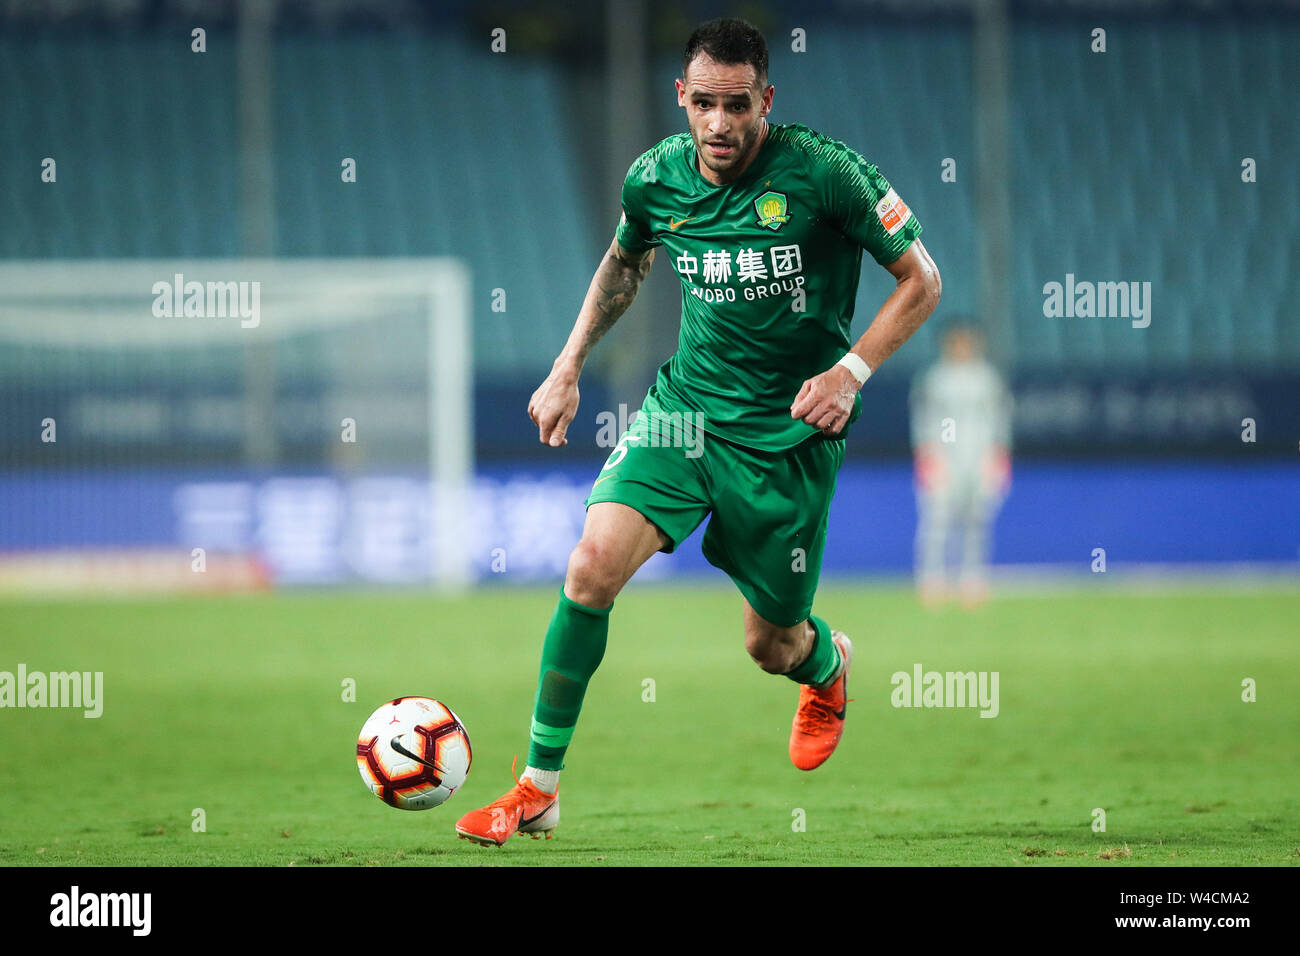 Brazilian football player Renato Soares de Oliveira Augusto, or simply Renato Augusto, of Beijing Sinobo Guoan F.C. keeps the ball during the 19th round of Chinese Football Association Super League (CSL) against Jiangsu Suning in Nanjing, east China’s Jiangsu province on 21 July 2019. Jiangsu Suning wins in the match with a 1-0. Stock Photo